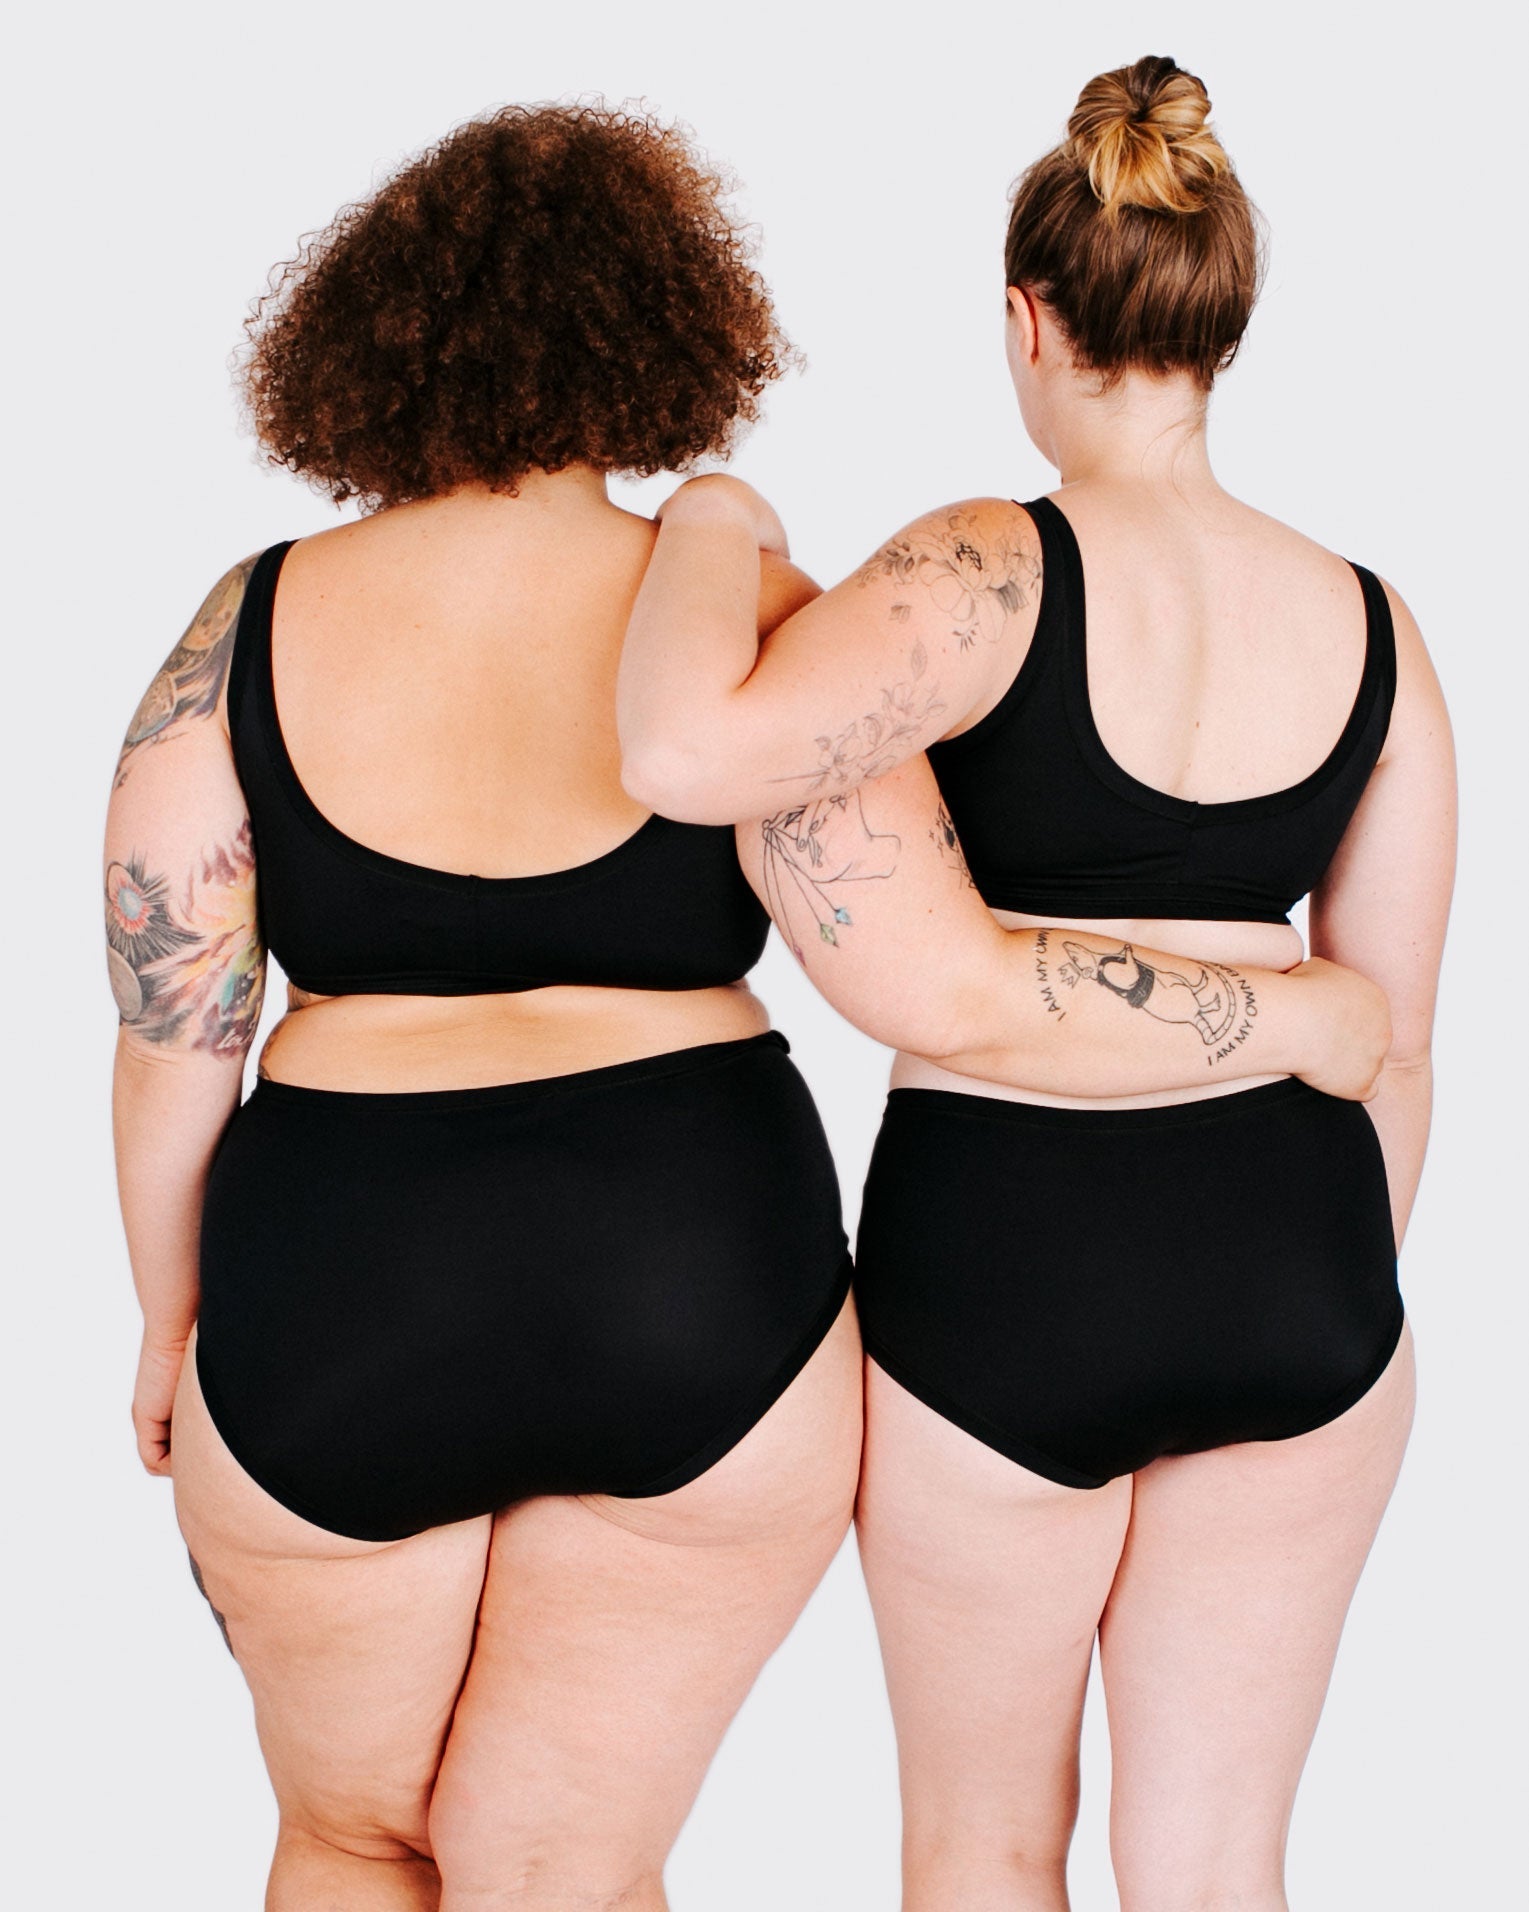 Fit photo from the back of Thunderpants recycled nylon Swimwear Top and Swimwear Original style bottoms in Plain Black on two models standing together.